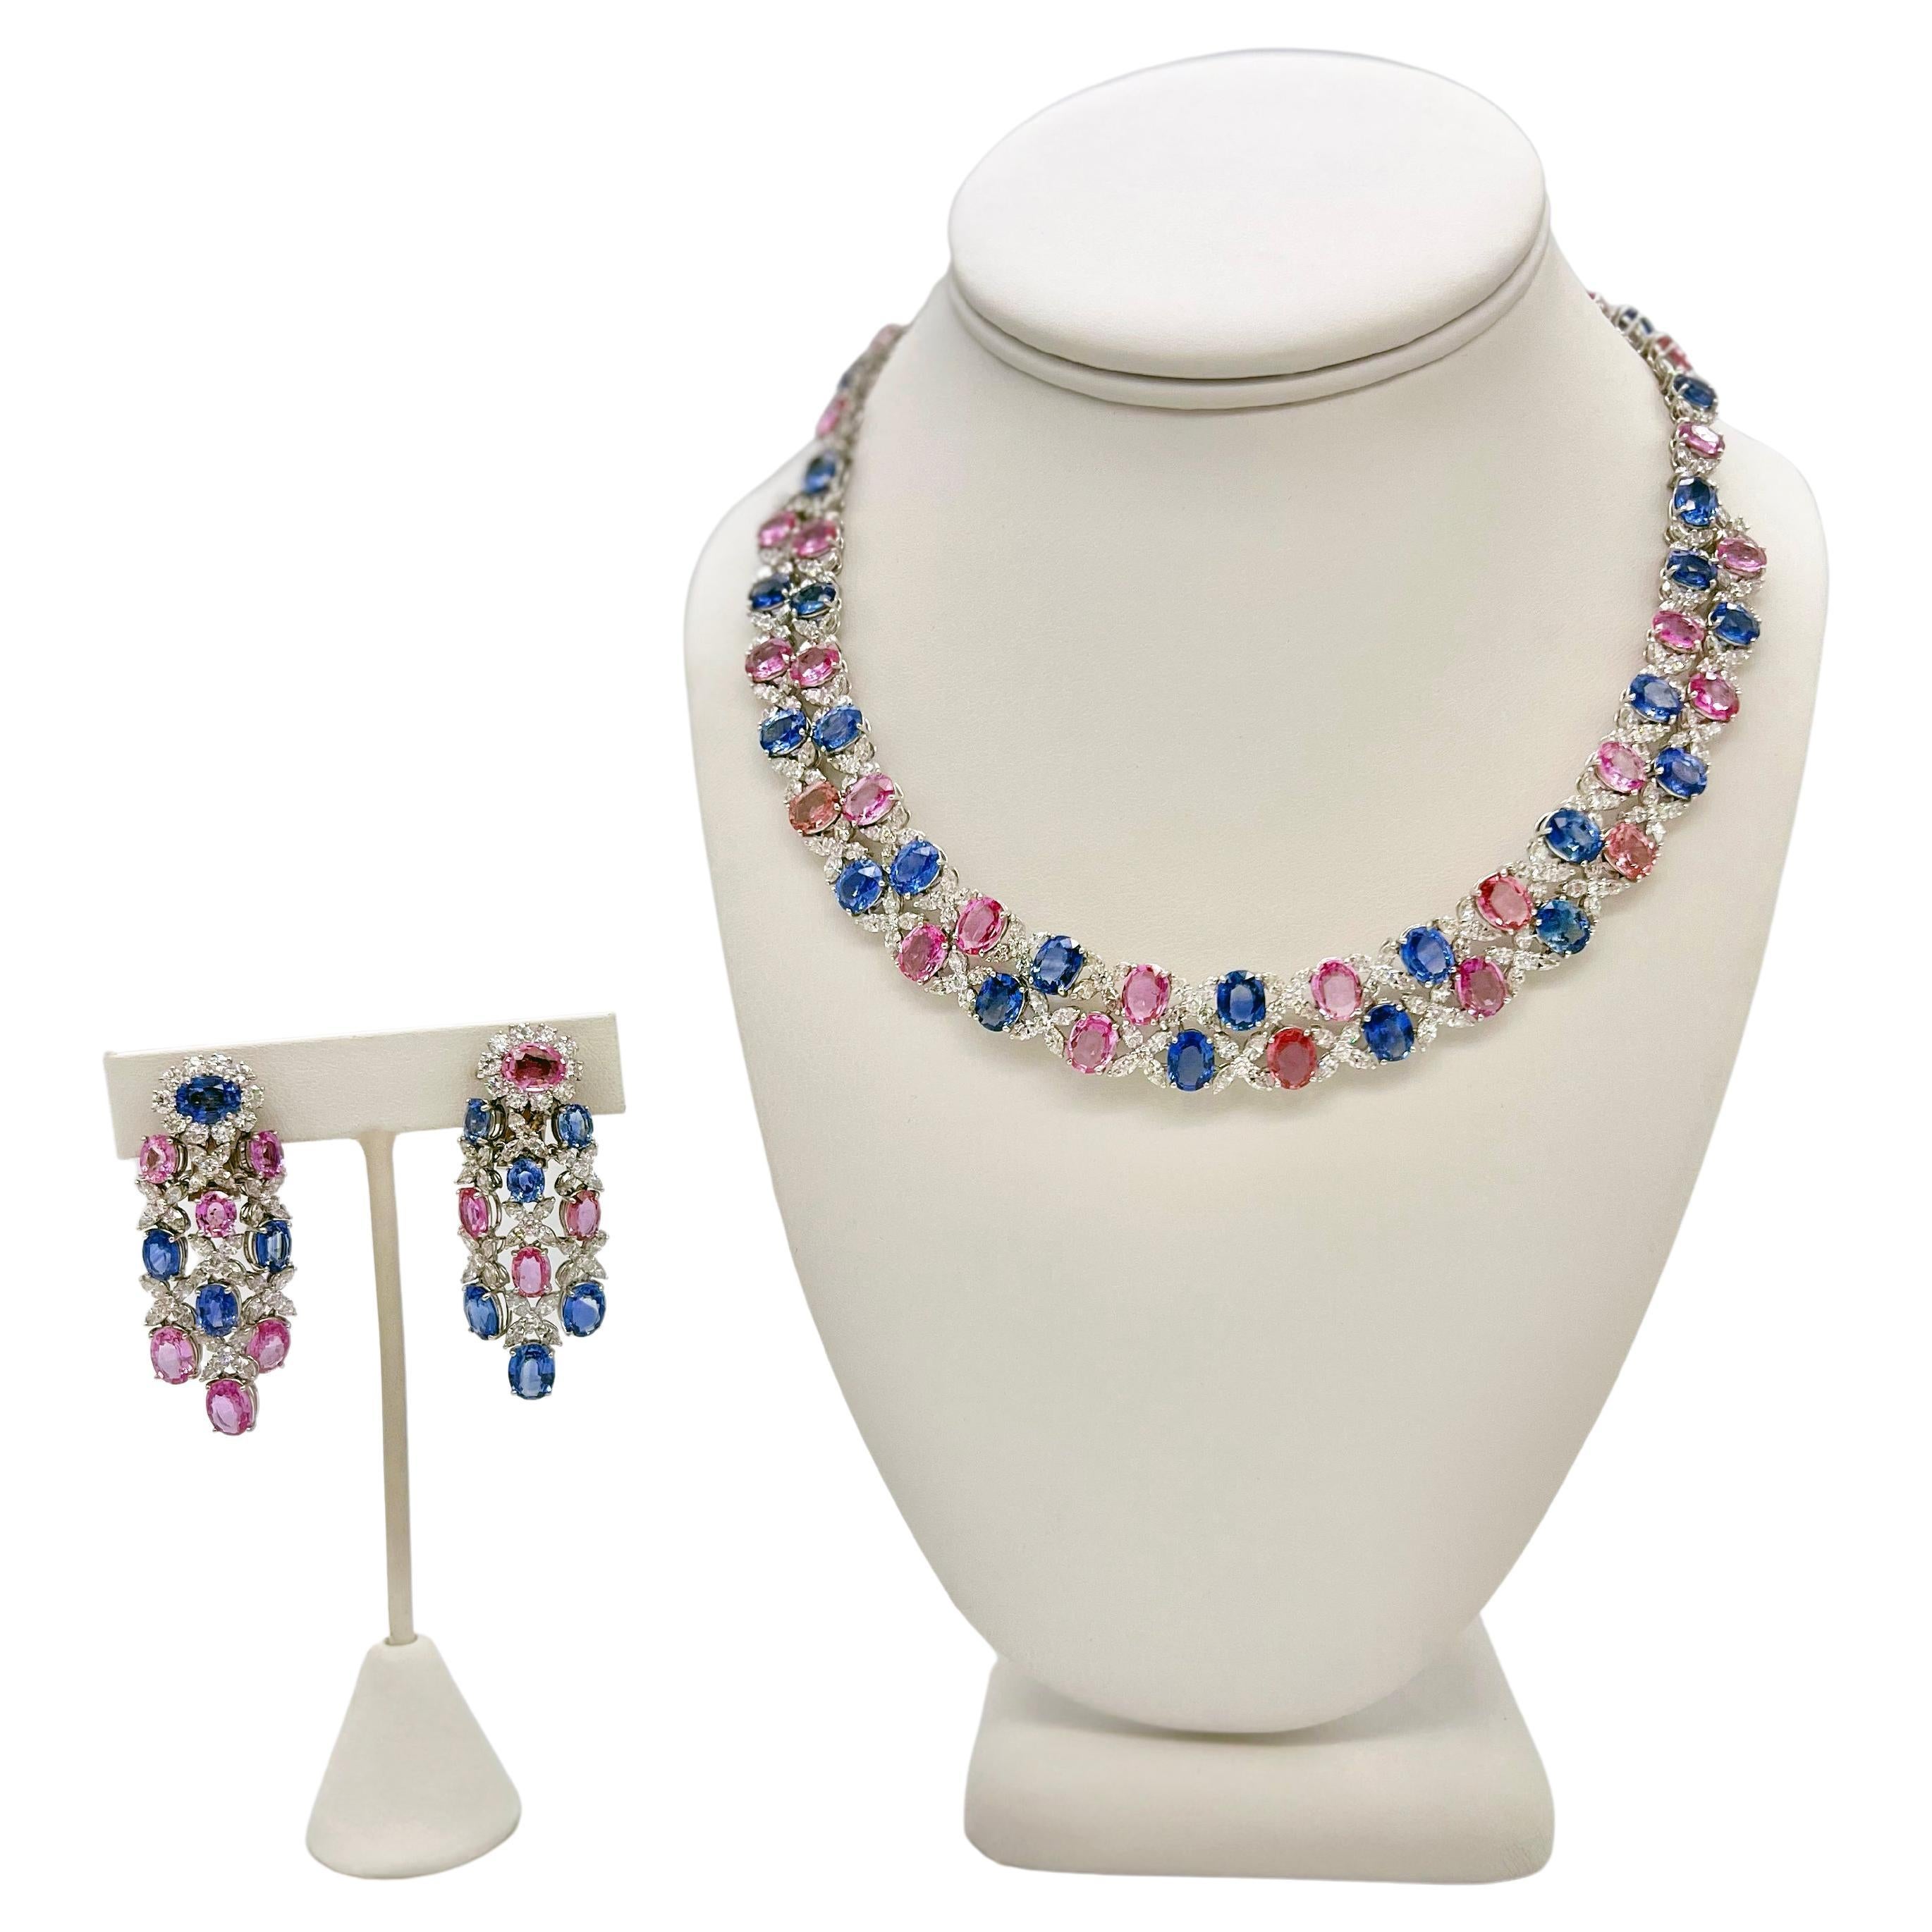 Multicolor 116.96 Total Carat Sapphire and Diamond Necklace in Platinum Setting